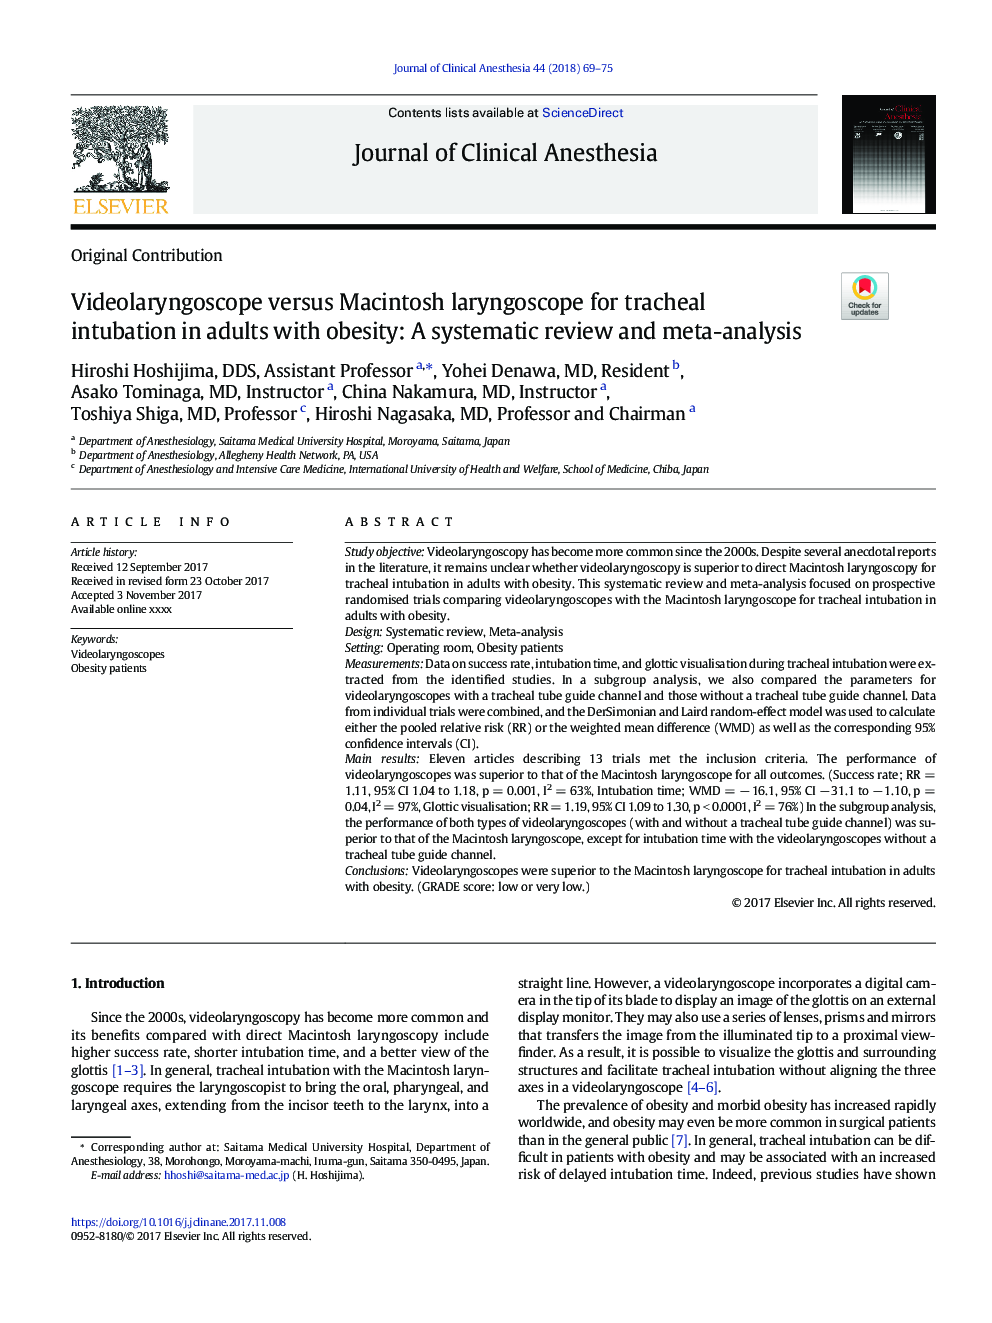 Videolaryngoscope versus Macintosh laryngoscope for tracheal intubation in adults with obesity: A systematic review and meta-analysis